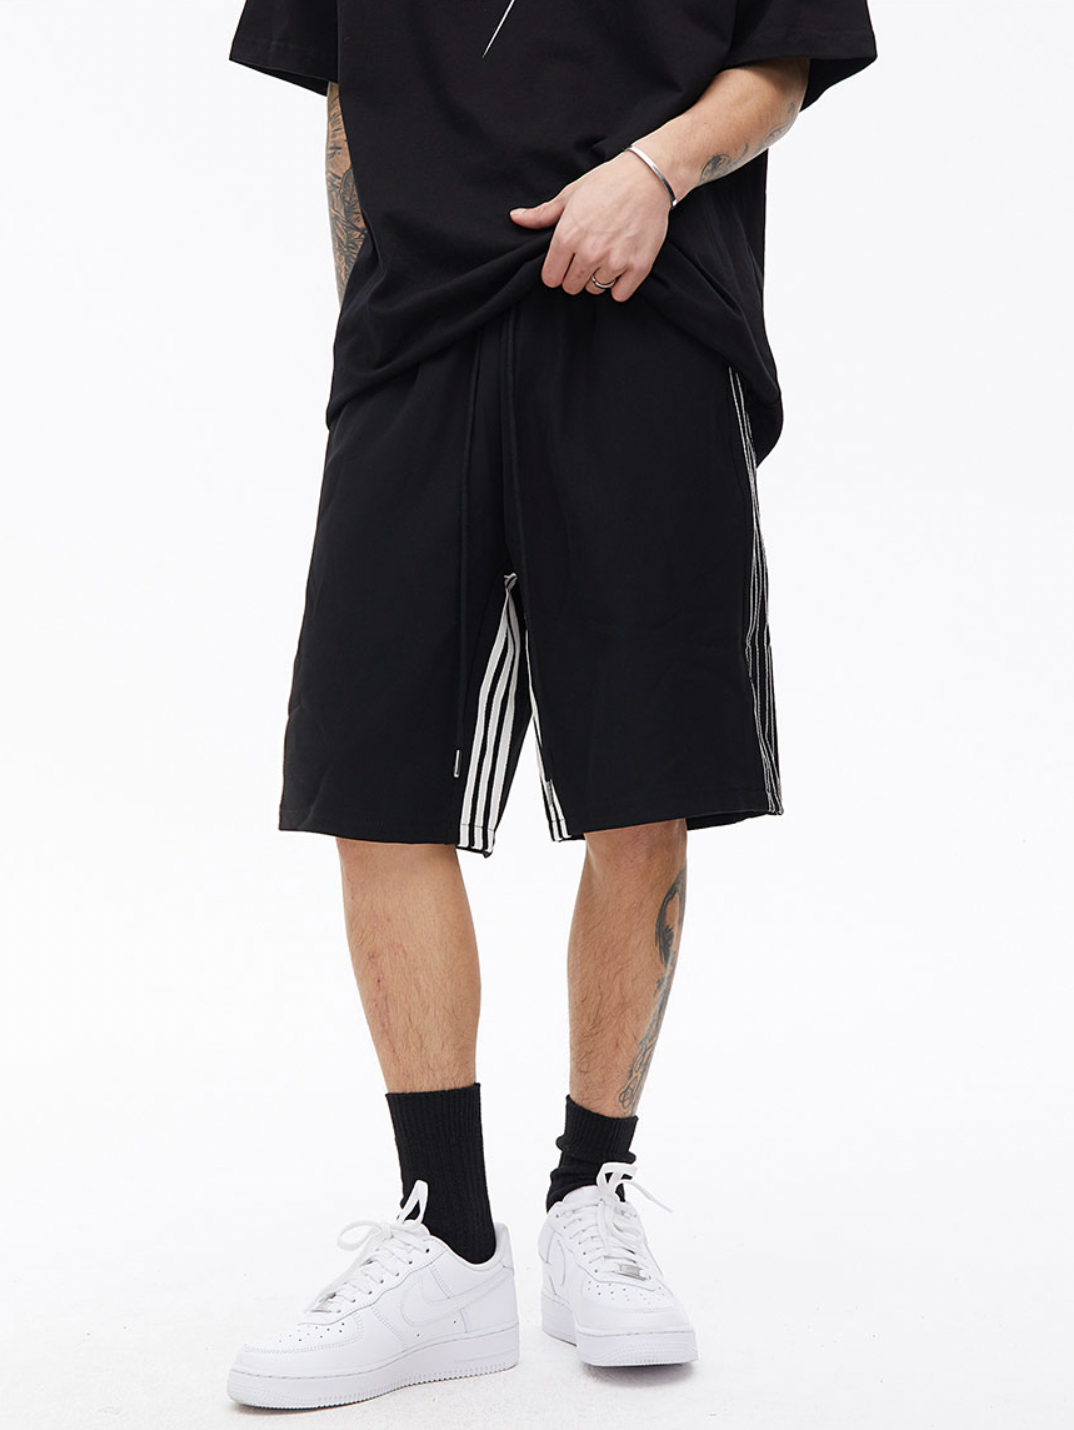 Contrast Color Striped Sports Shorts